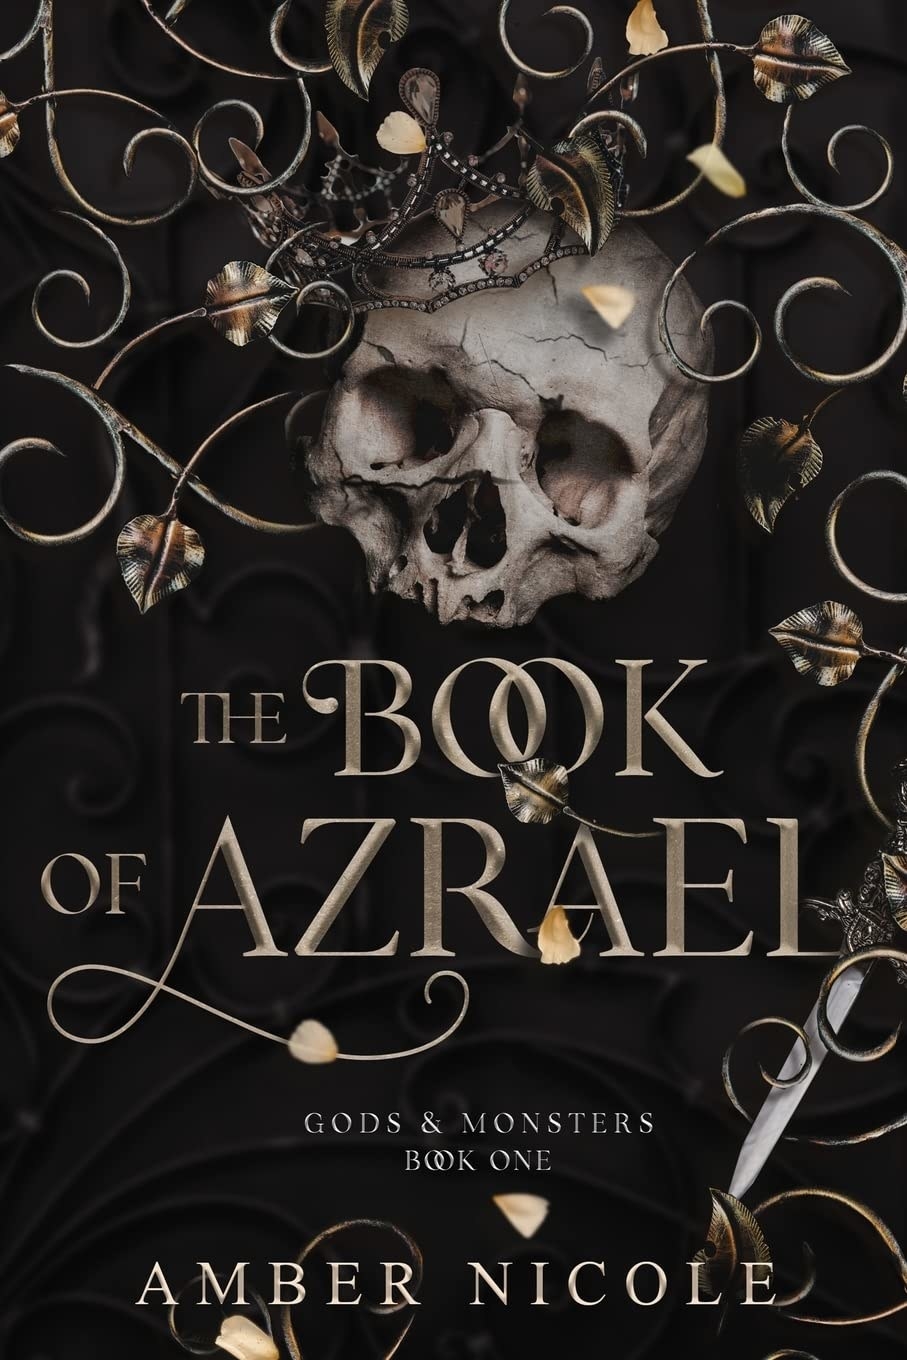 The Book of Azrael cover. Book by Amber Nicole.